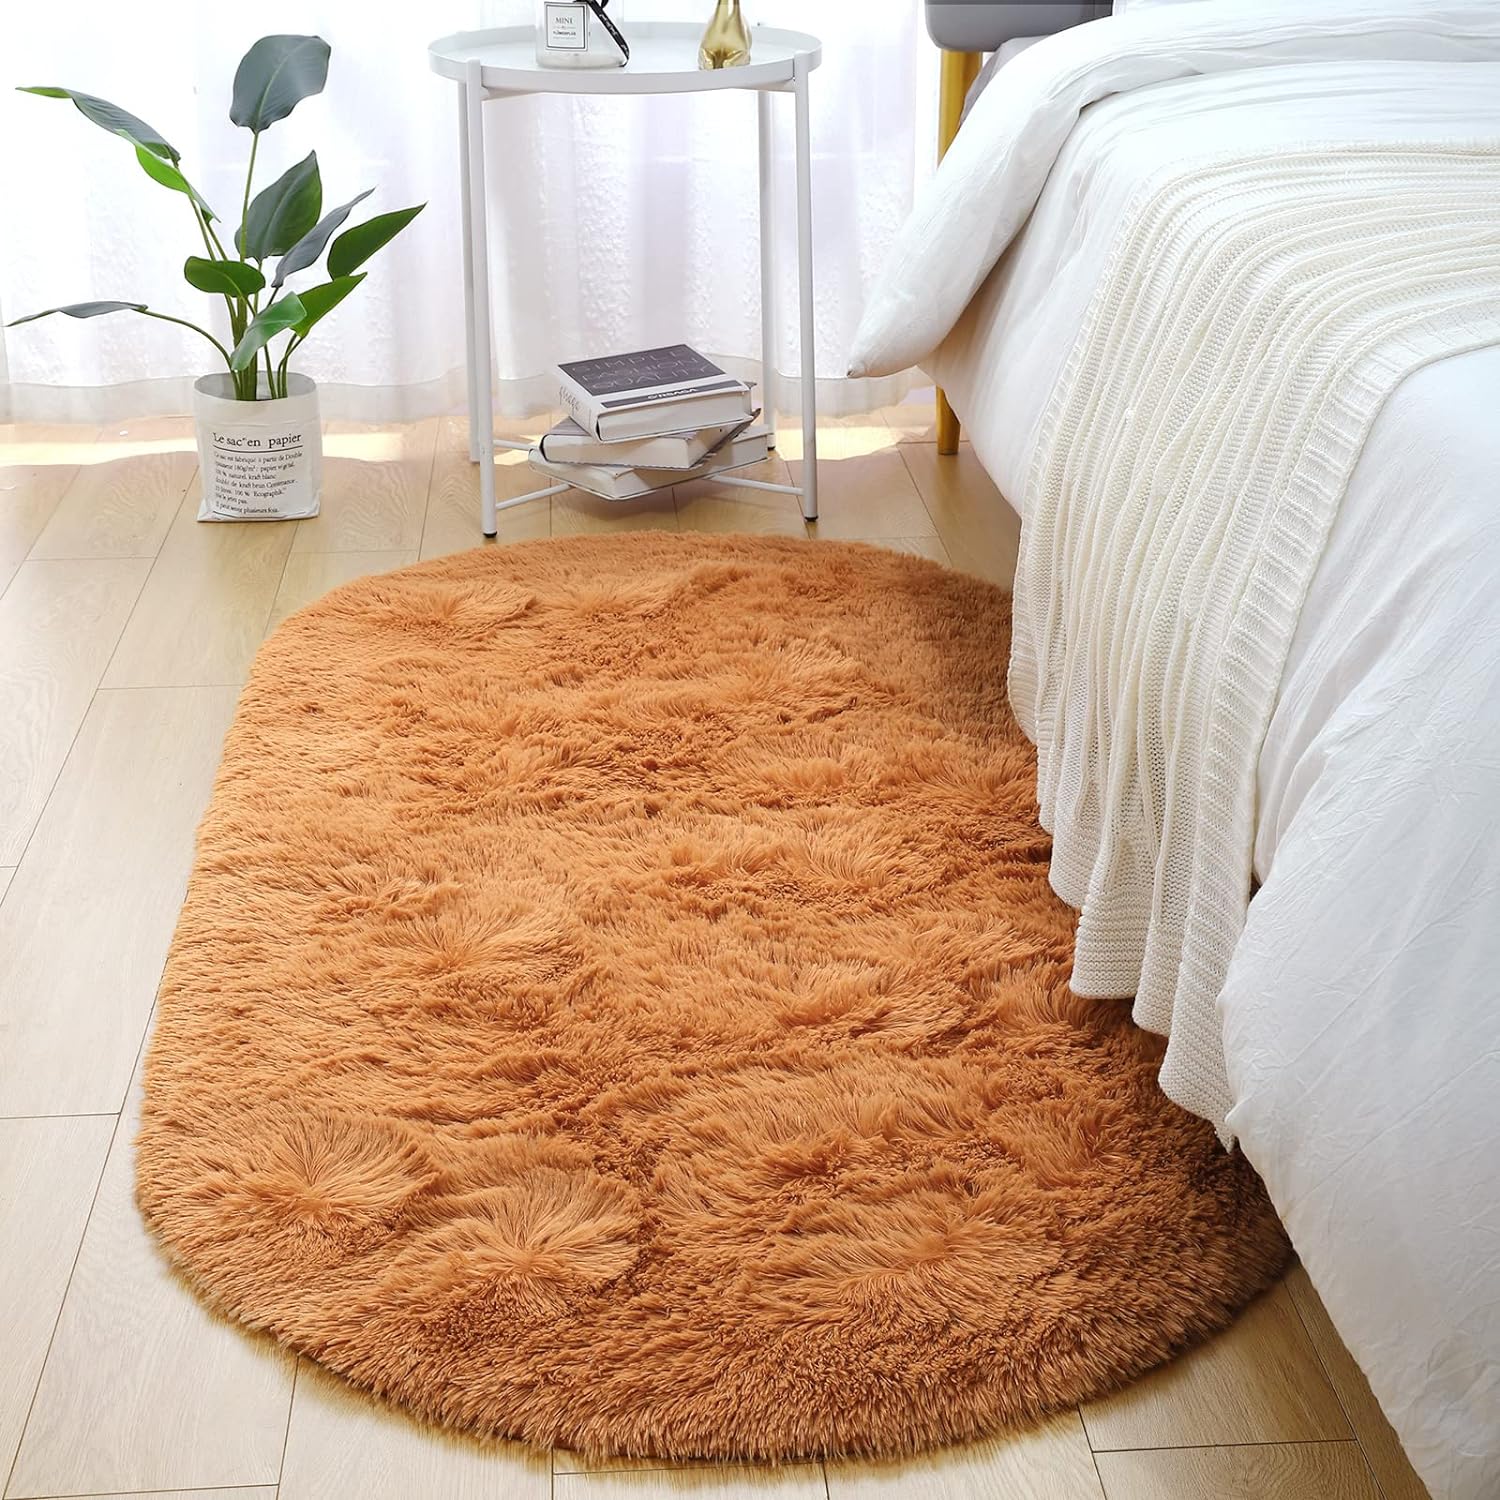 Merelax Soft Shaggy Rug for Kids Bedroom Oval 2.6'x5.3' Khaki Plush Fluffy Carpet for Living Room, Furry Carpet for Teen Girls Room, Anti-Skid Fuzzy Comfy Rug for Nursery Decor Cute Baby Play Mat